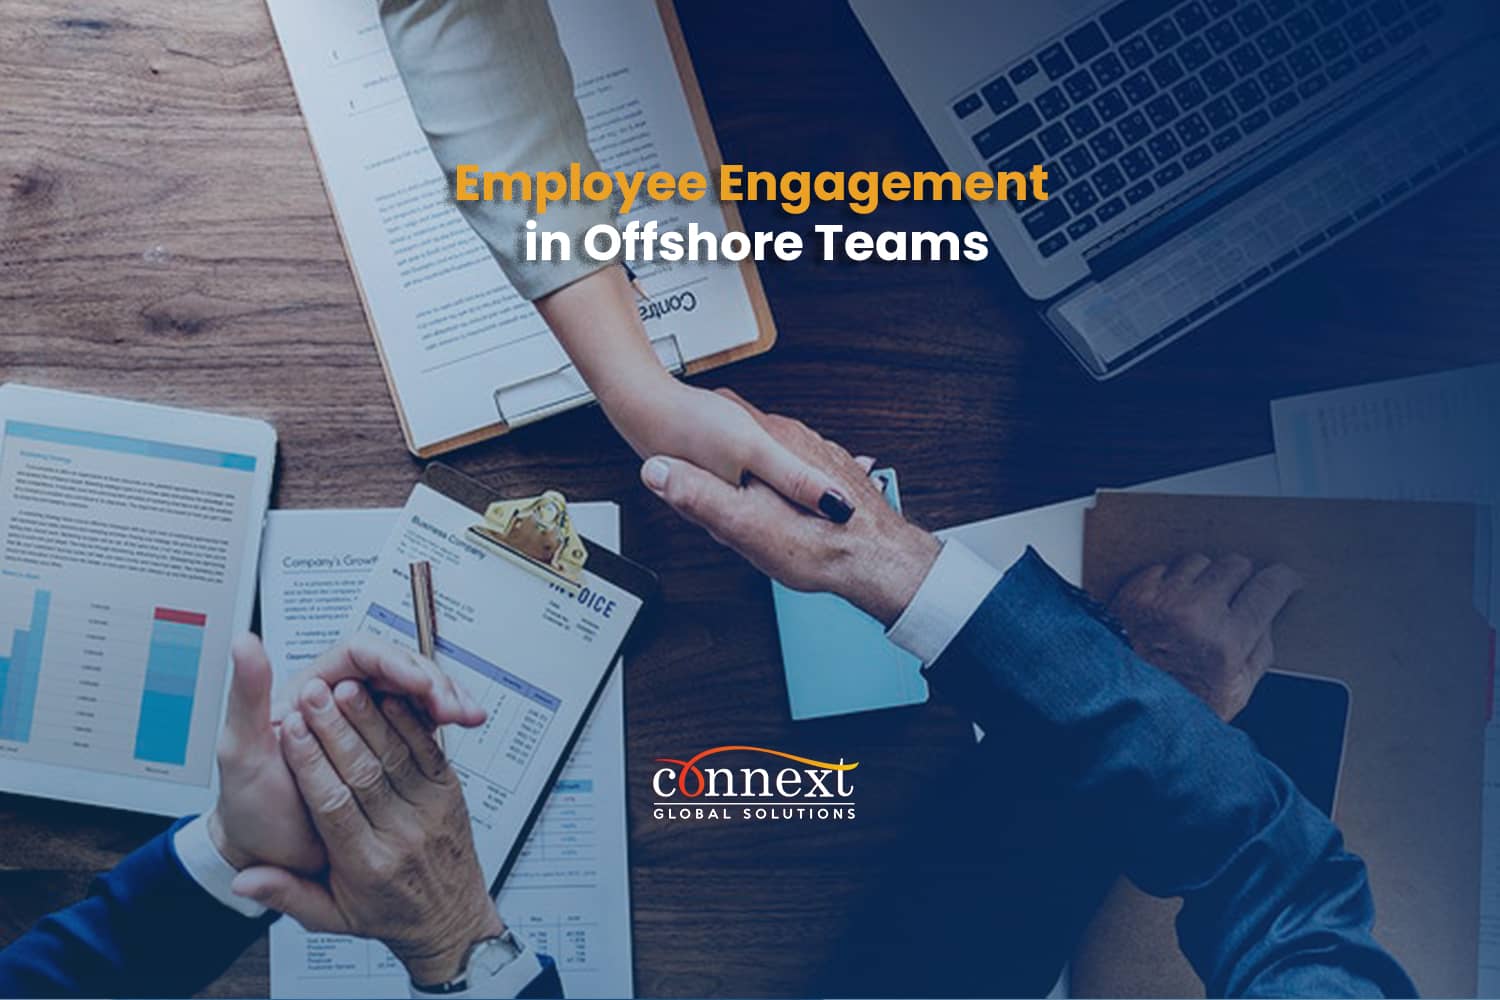 Employee Engagement in Offshore Teams